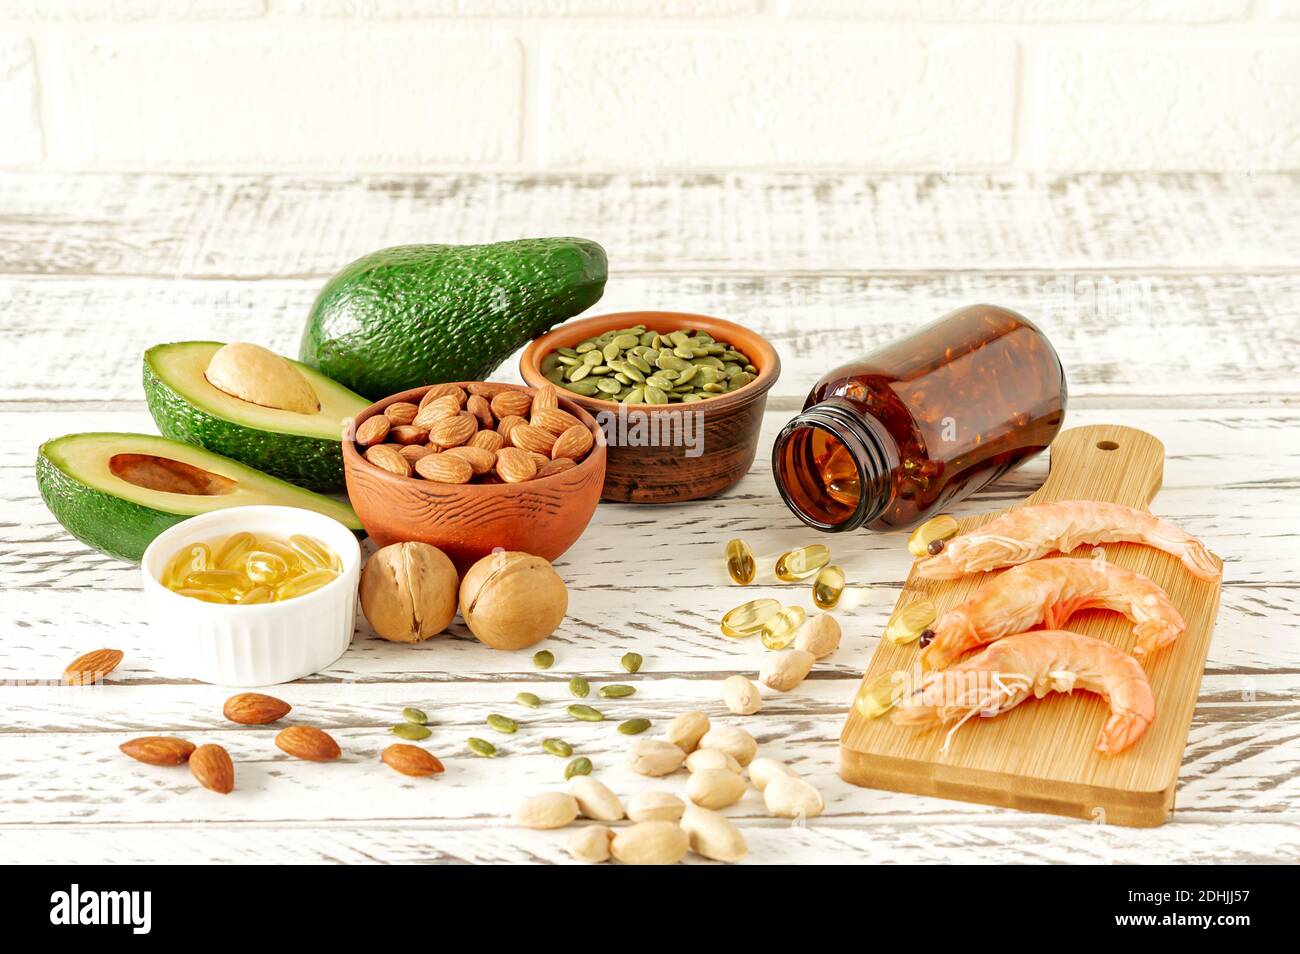 Animal and vegetable sources of omega-3 acids. Balanced diet concept. Assortment of healthy food on woodent table, Stock Photo